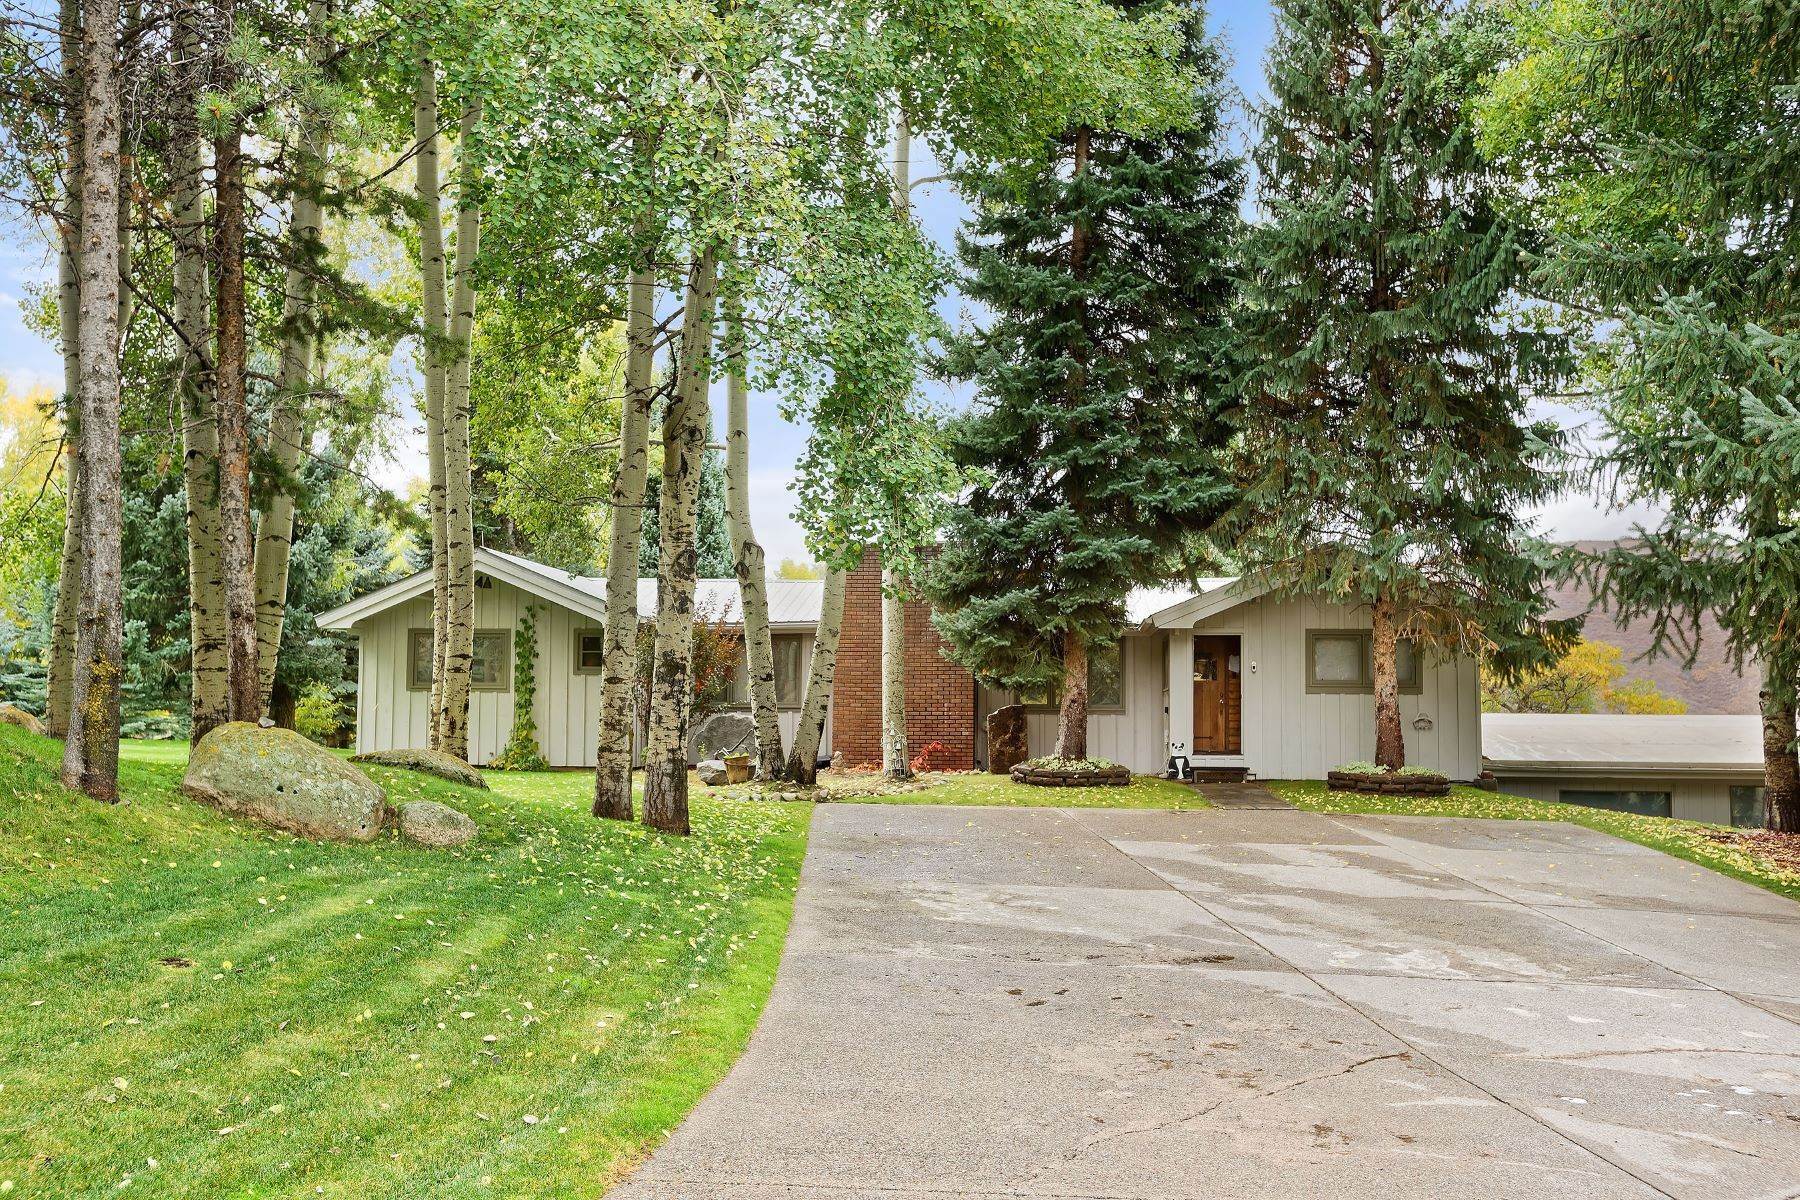 44. Single Family Homes for Sale at Once-In-A-Lifetime Iconic Aspen Legacy Estate 1650 McLain Flats Road Aspen, Colorado 81611 United States